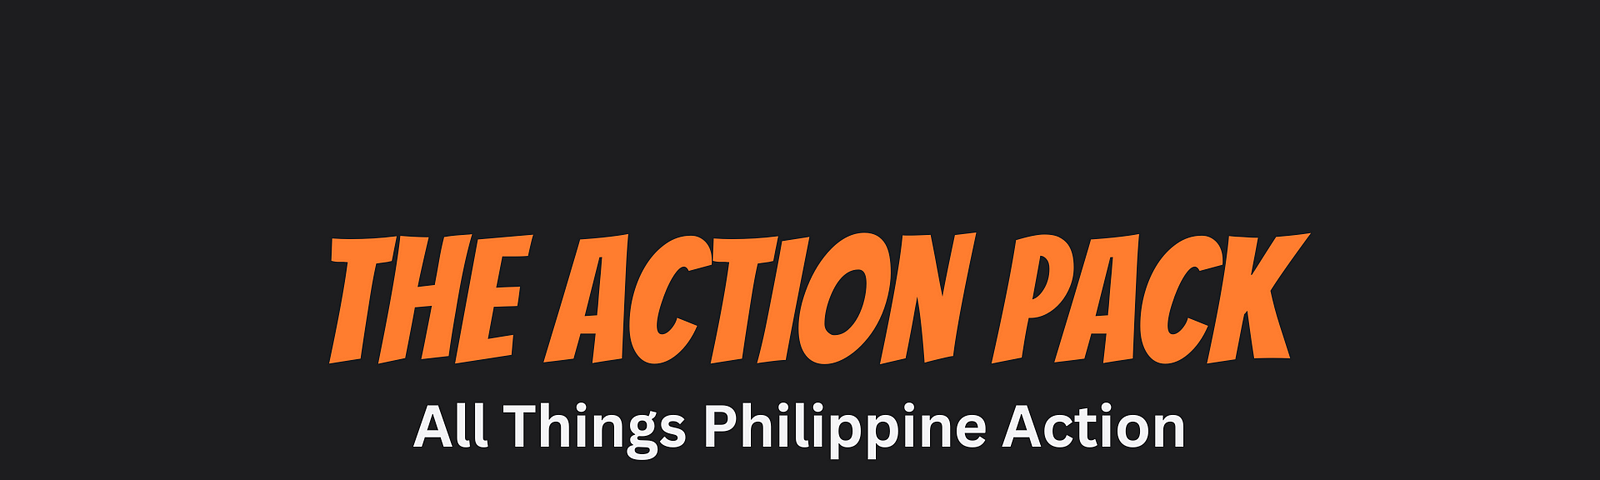 The Action Pack logo, All Things Philippine Action